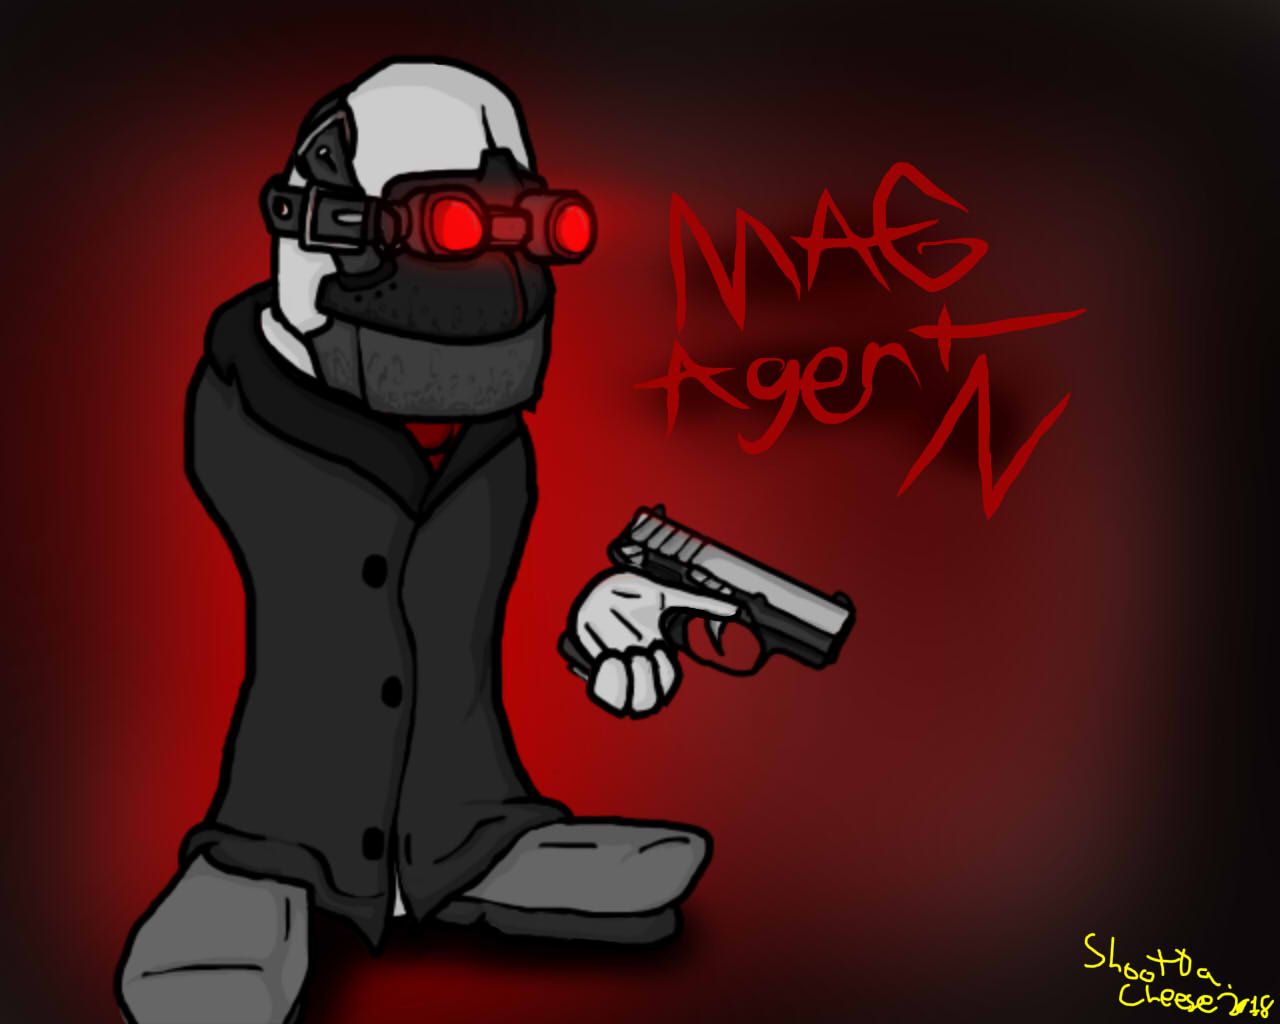 Madness:Project Nexus MAG Agent: N by ShootDaCheese on Newgrounds